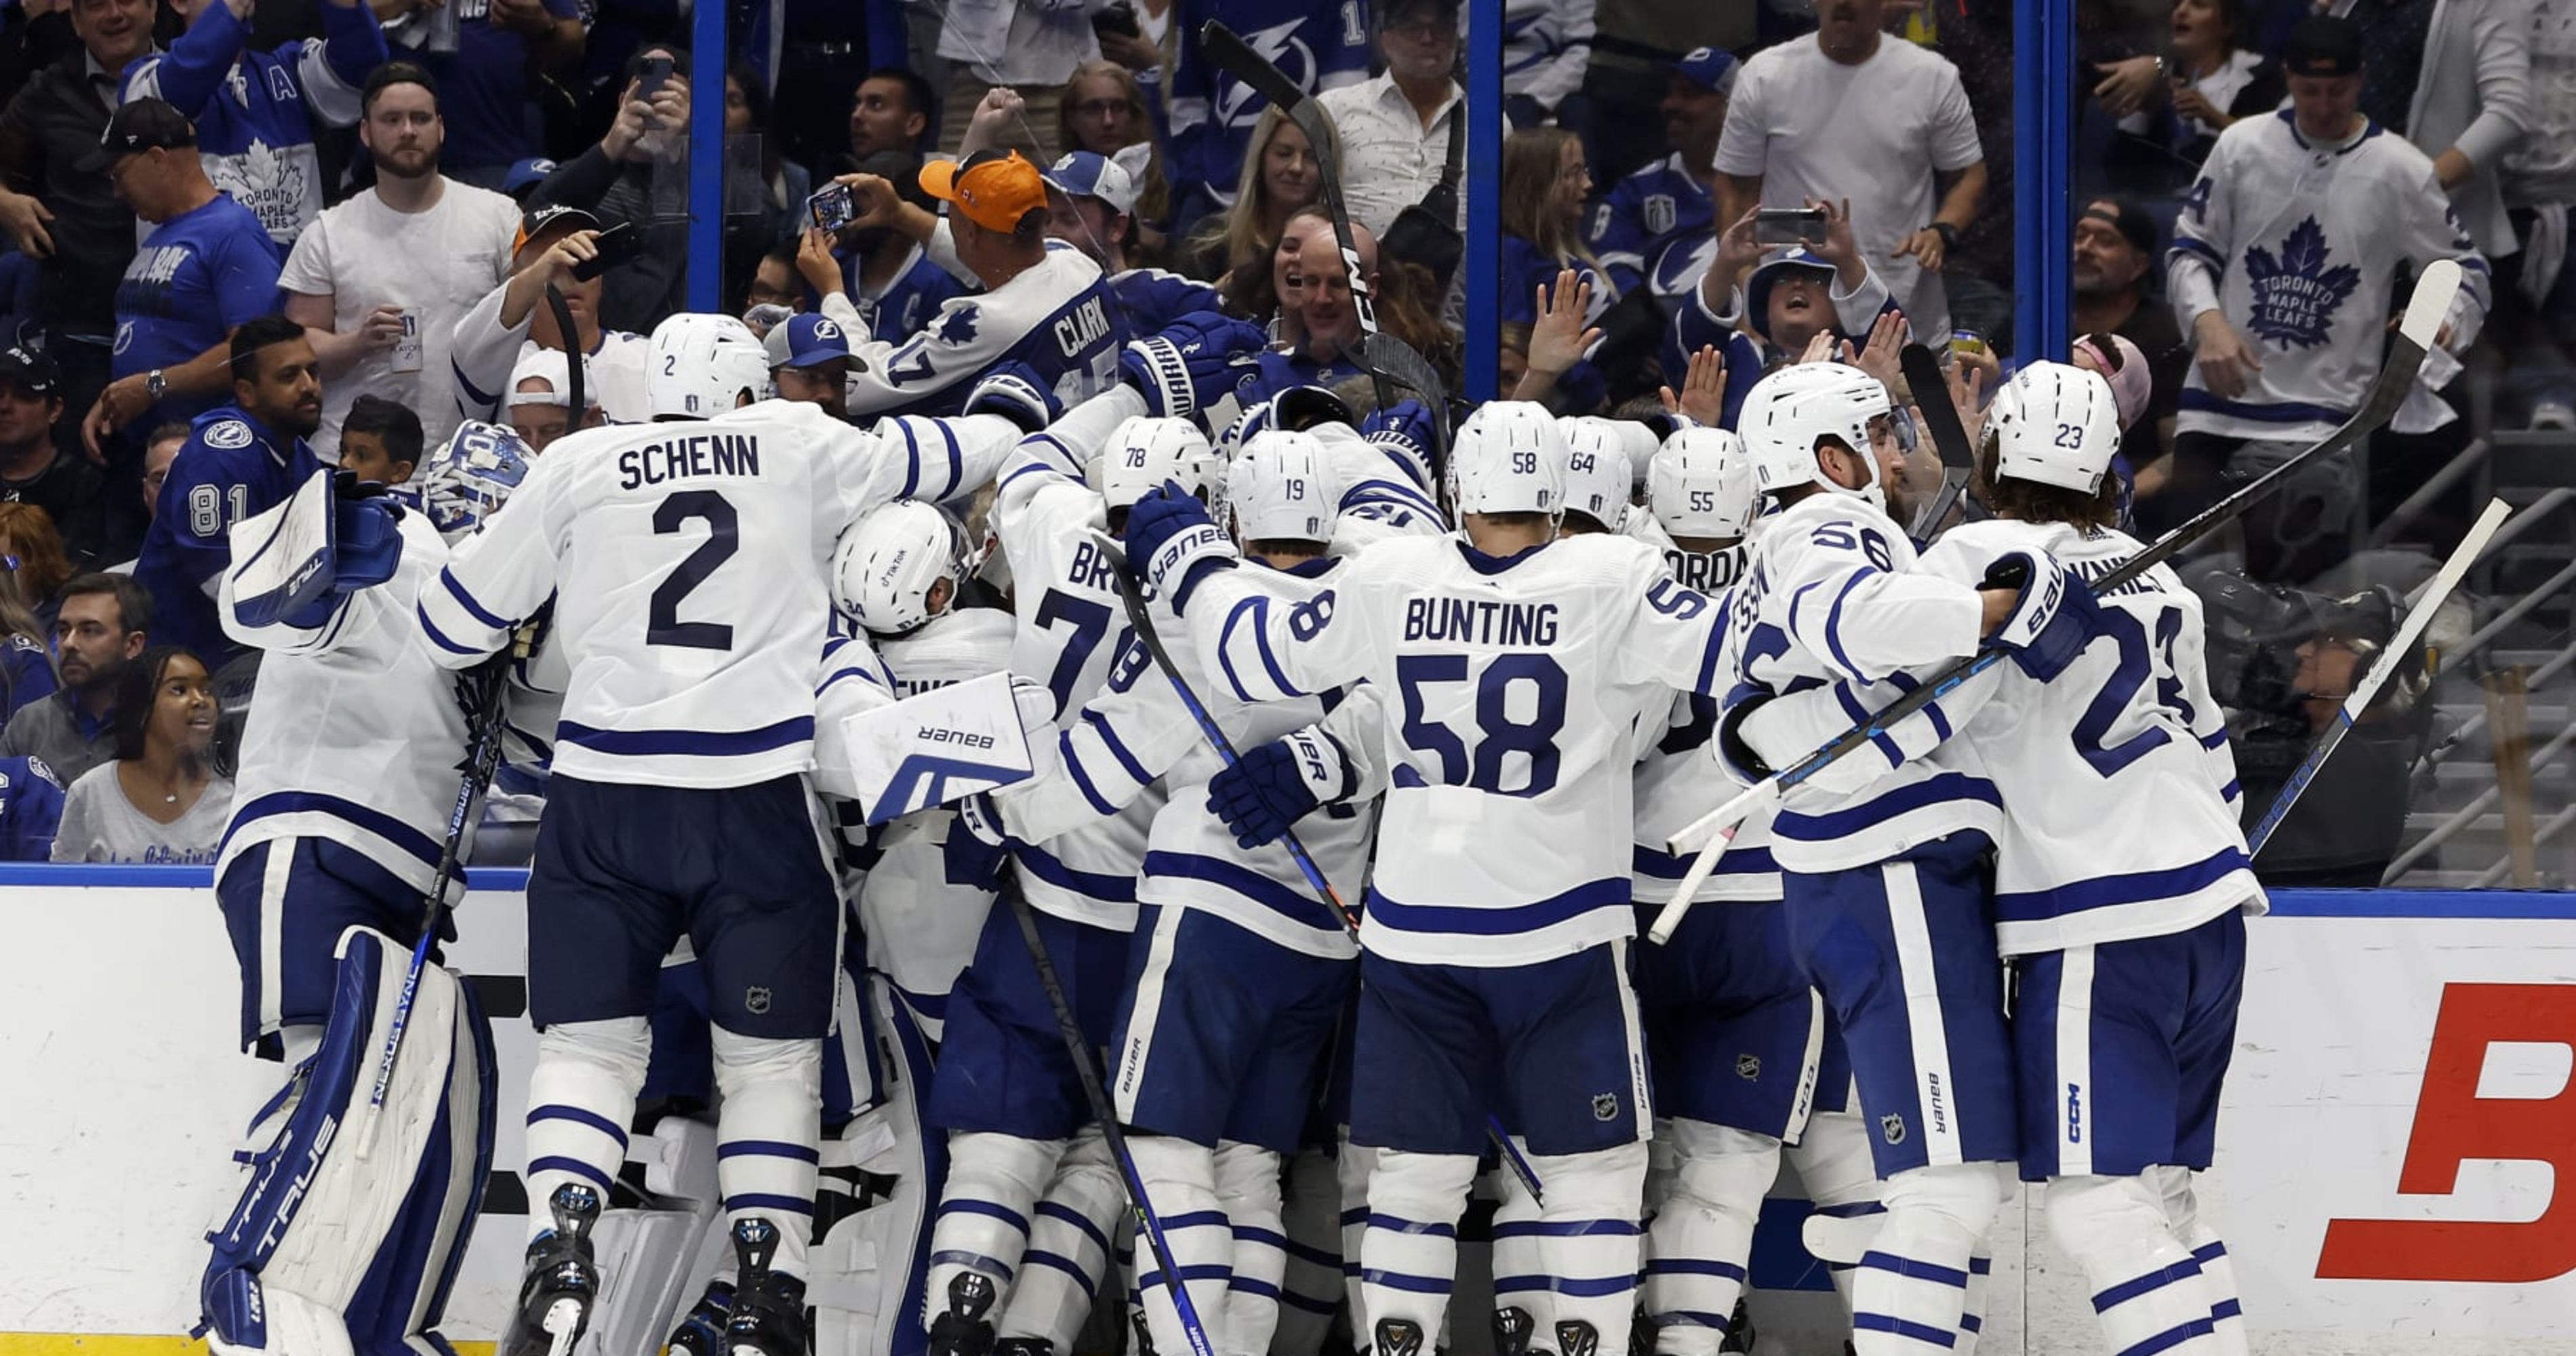 Toronto Maple Leafs playoff history: Last Stanley Cup win and more